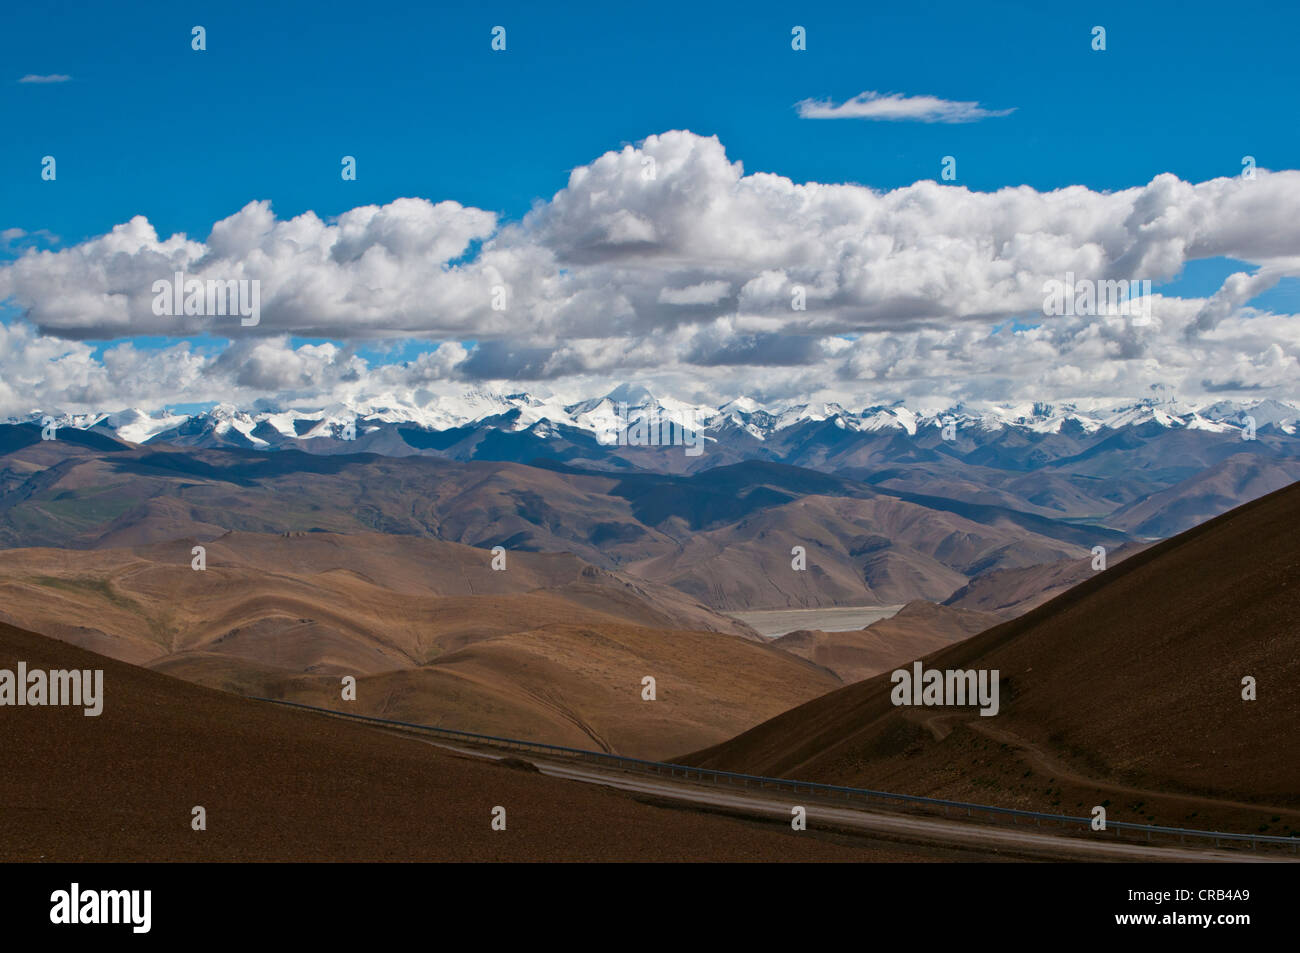 View of Mount Everest and the Himalayas, Tibet, Asia Stock Photo